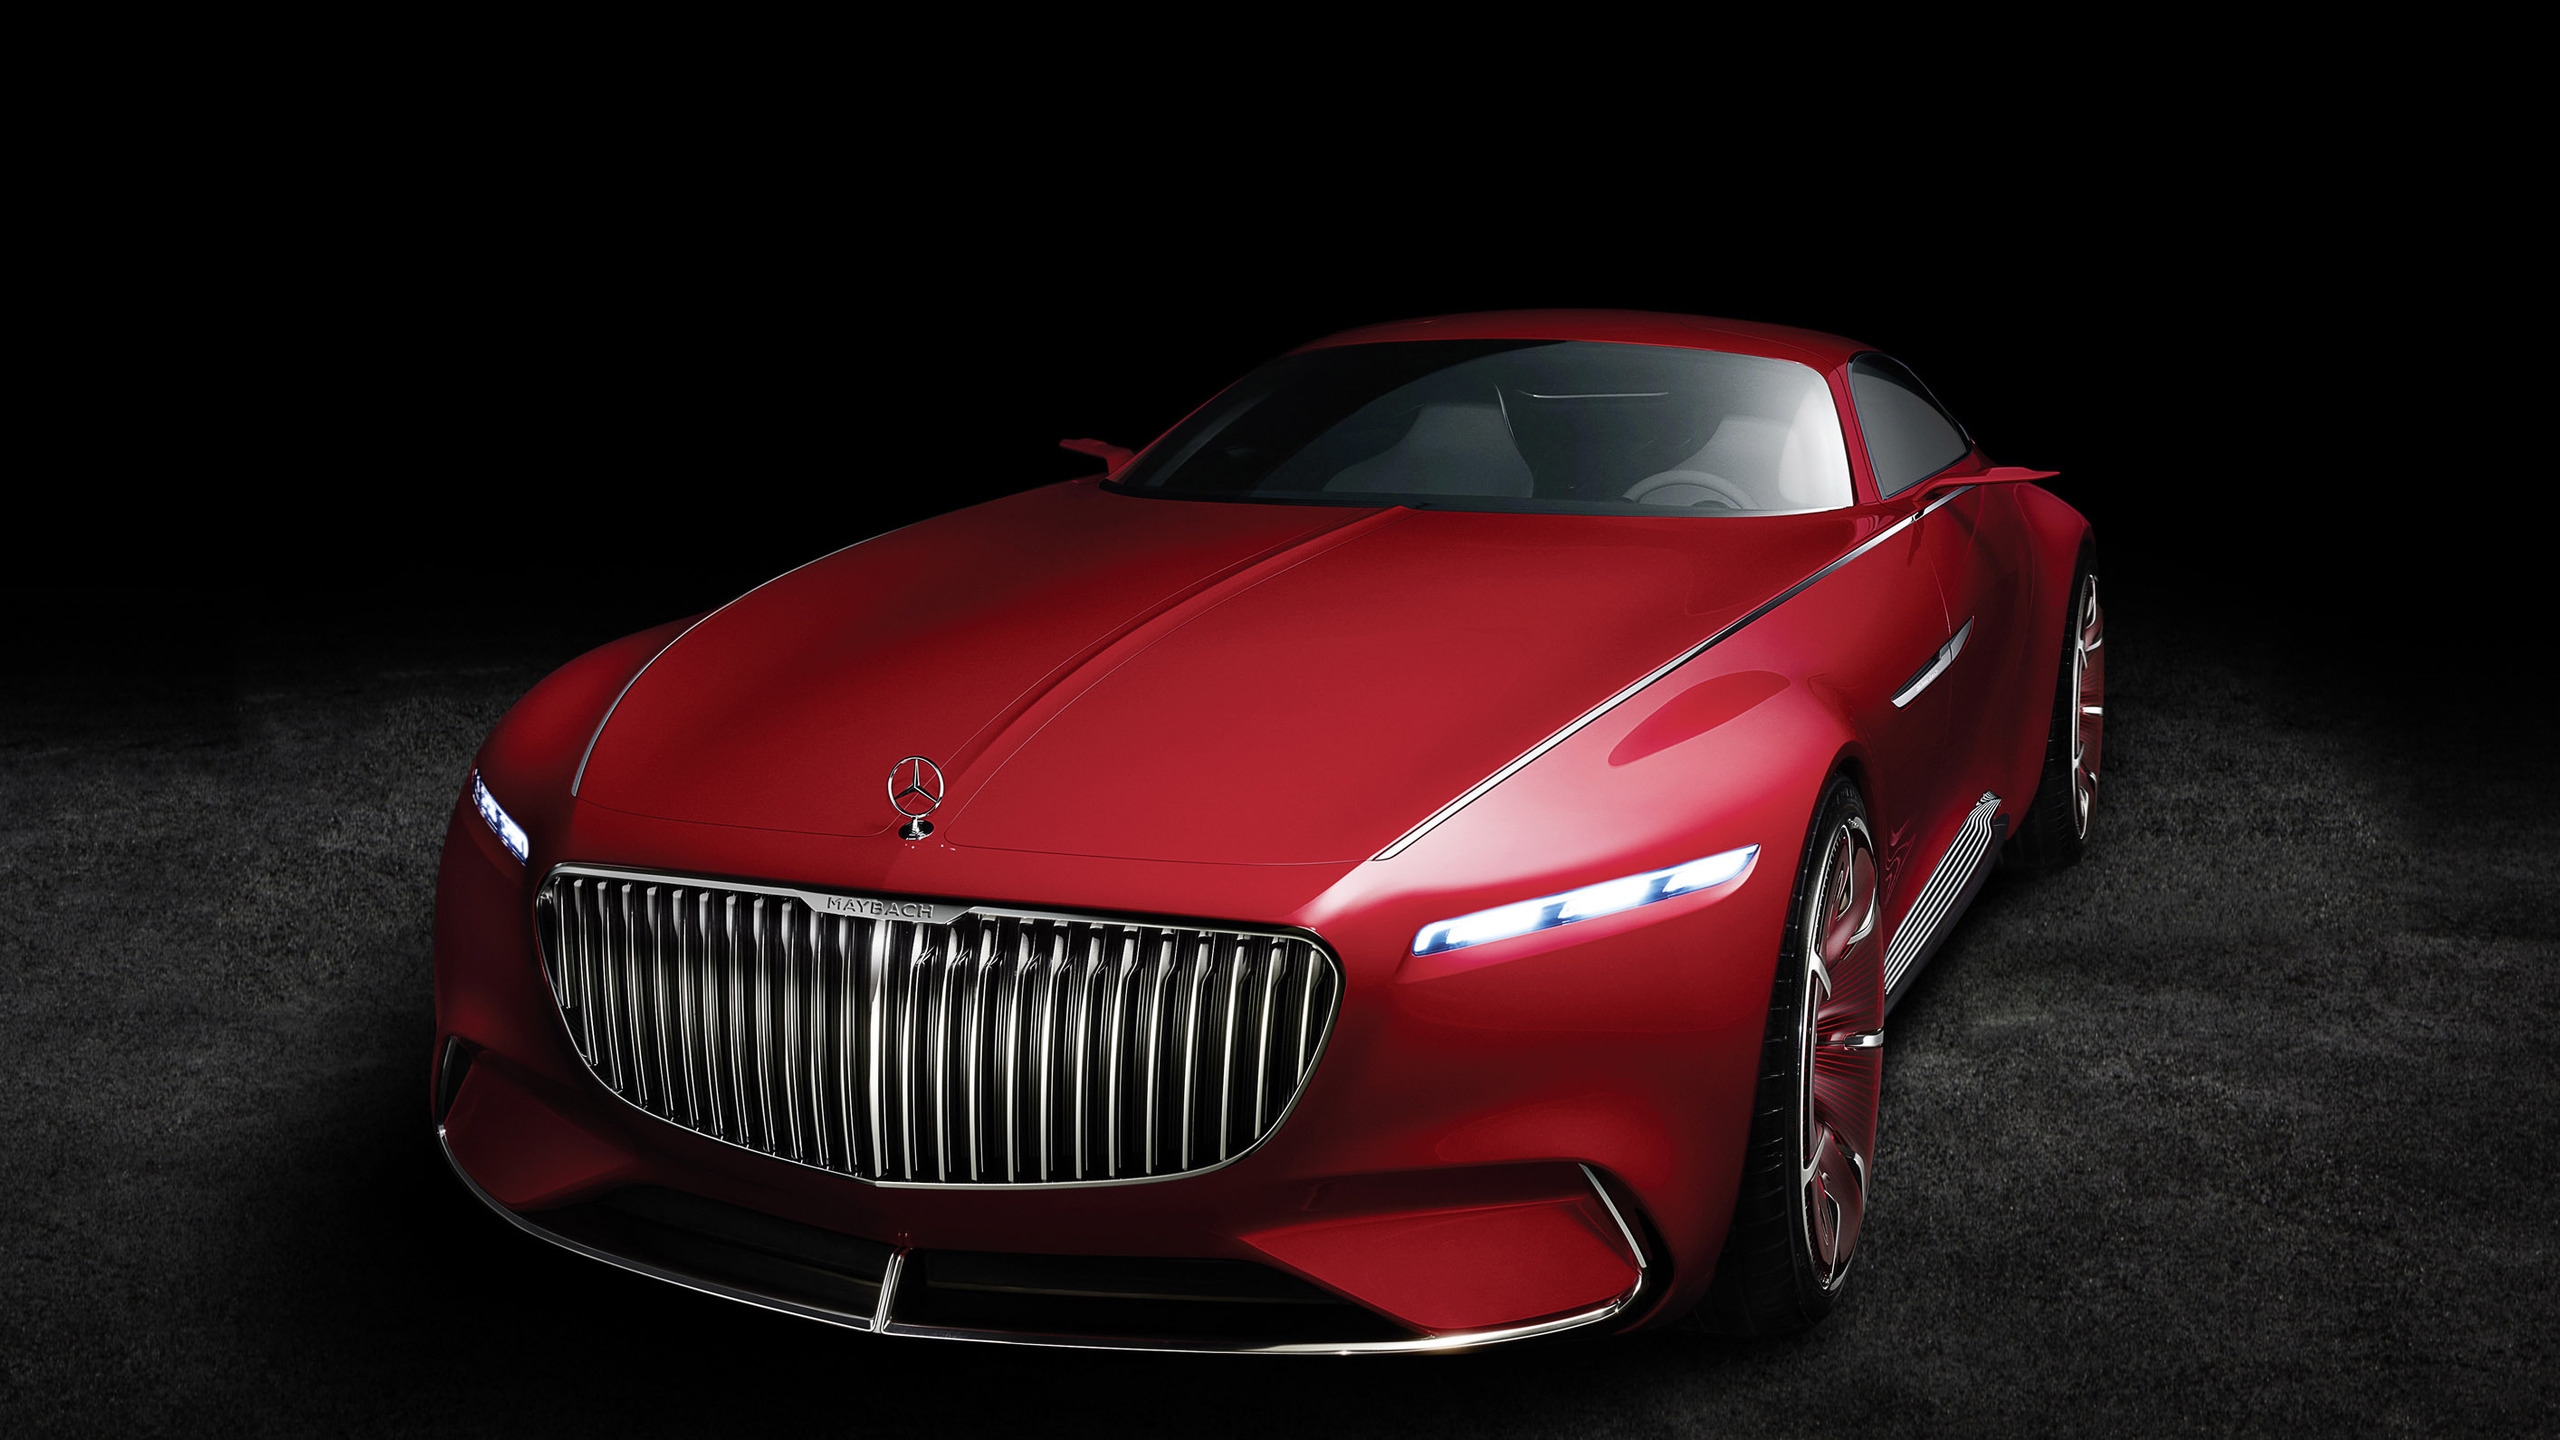 2016 Vision Mercedes Maybach 6 for 2560x1440 HDTV resolution